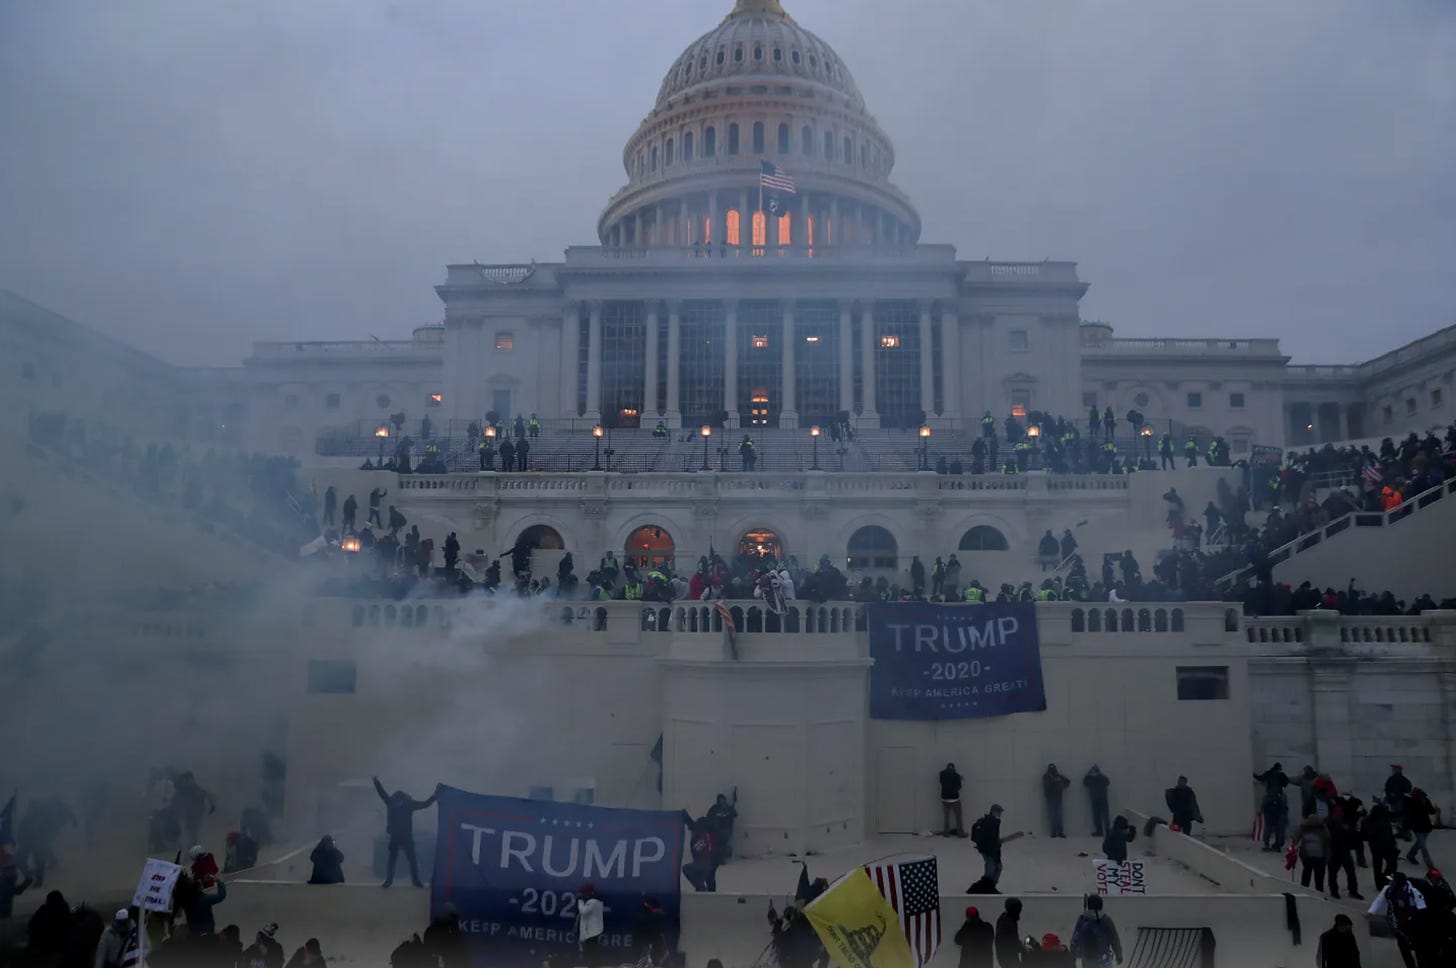 Photo of Trump supporters storming the U.S. Capitol Building on January 6, 2021